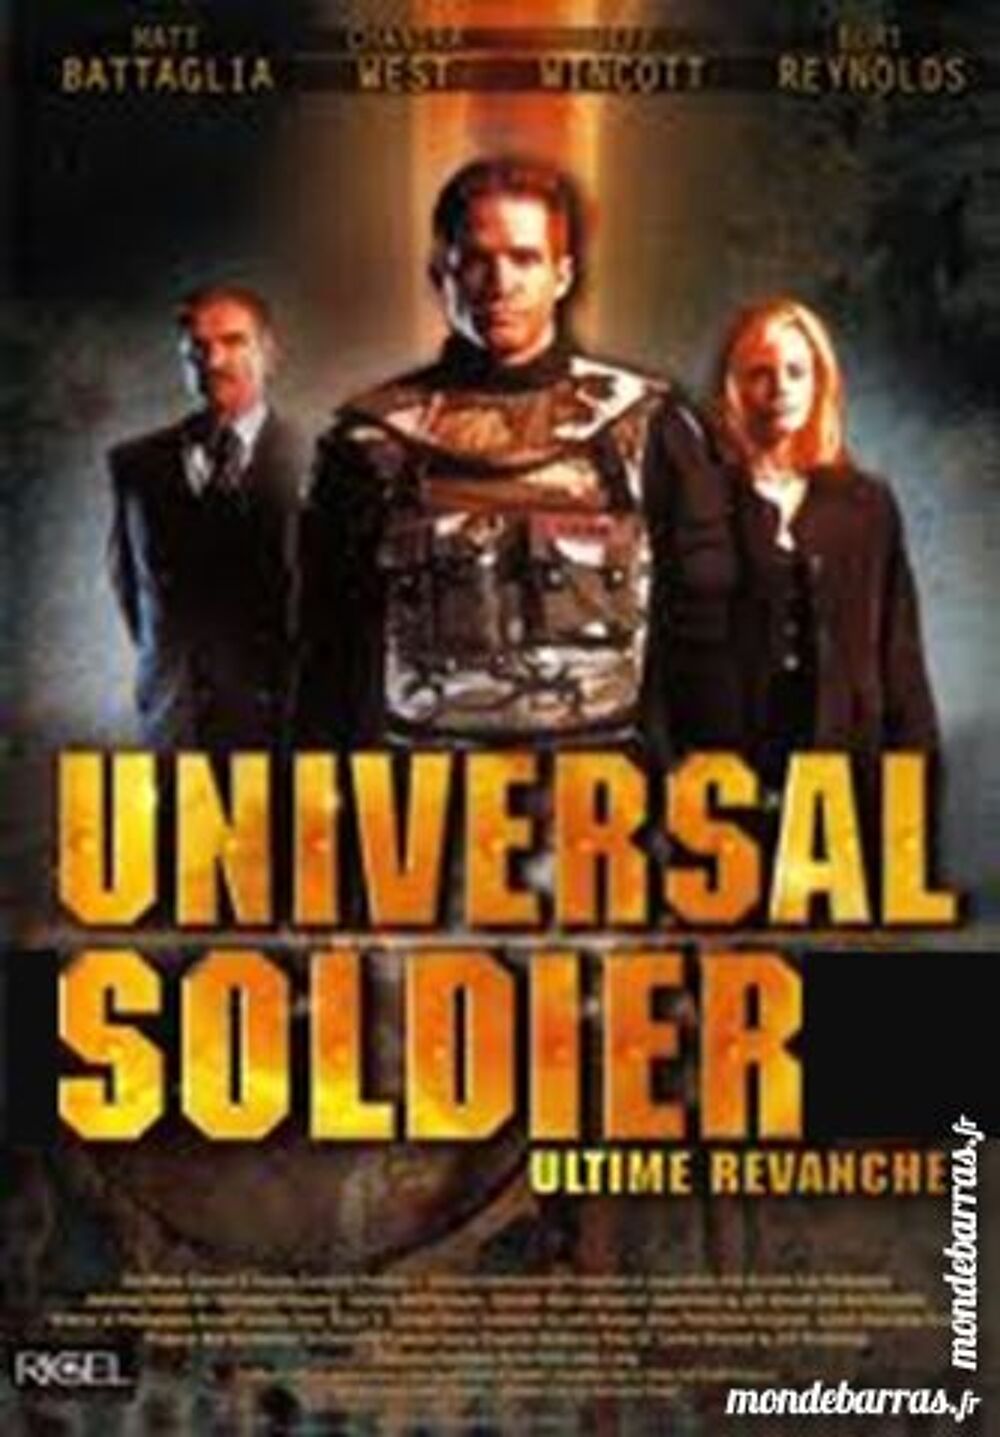 K7 Vhs: Universal Soldier Ultime revanche (163) DVD et blu-ray